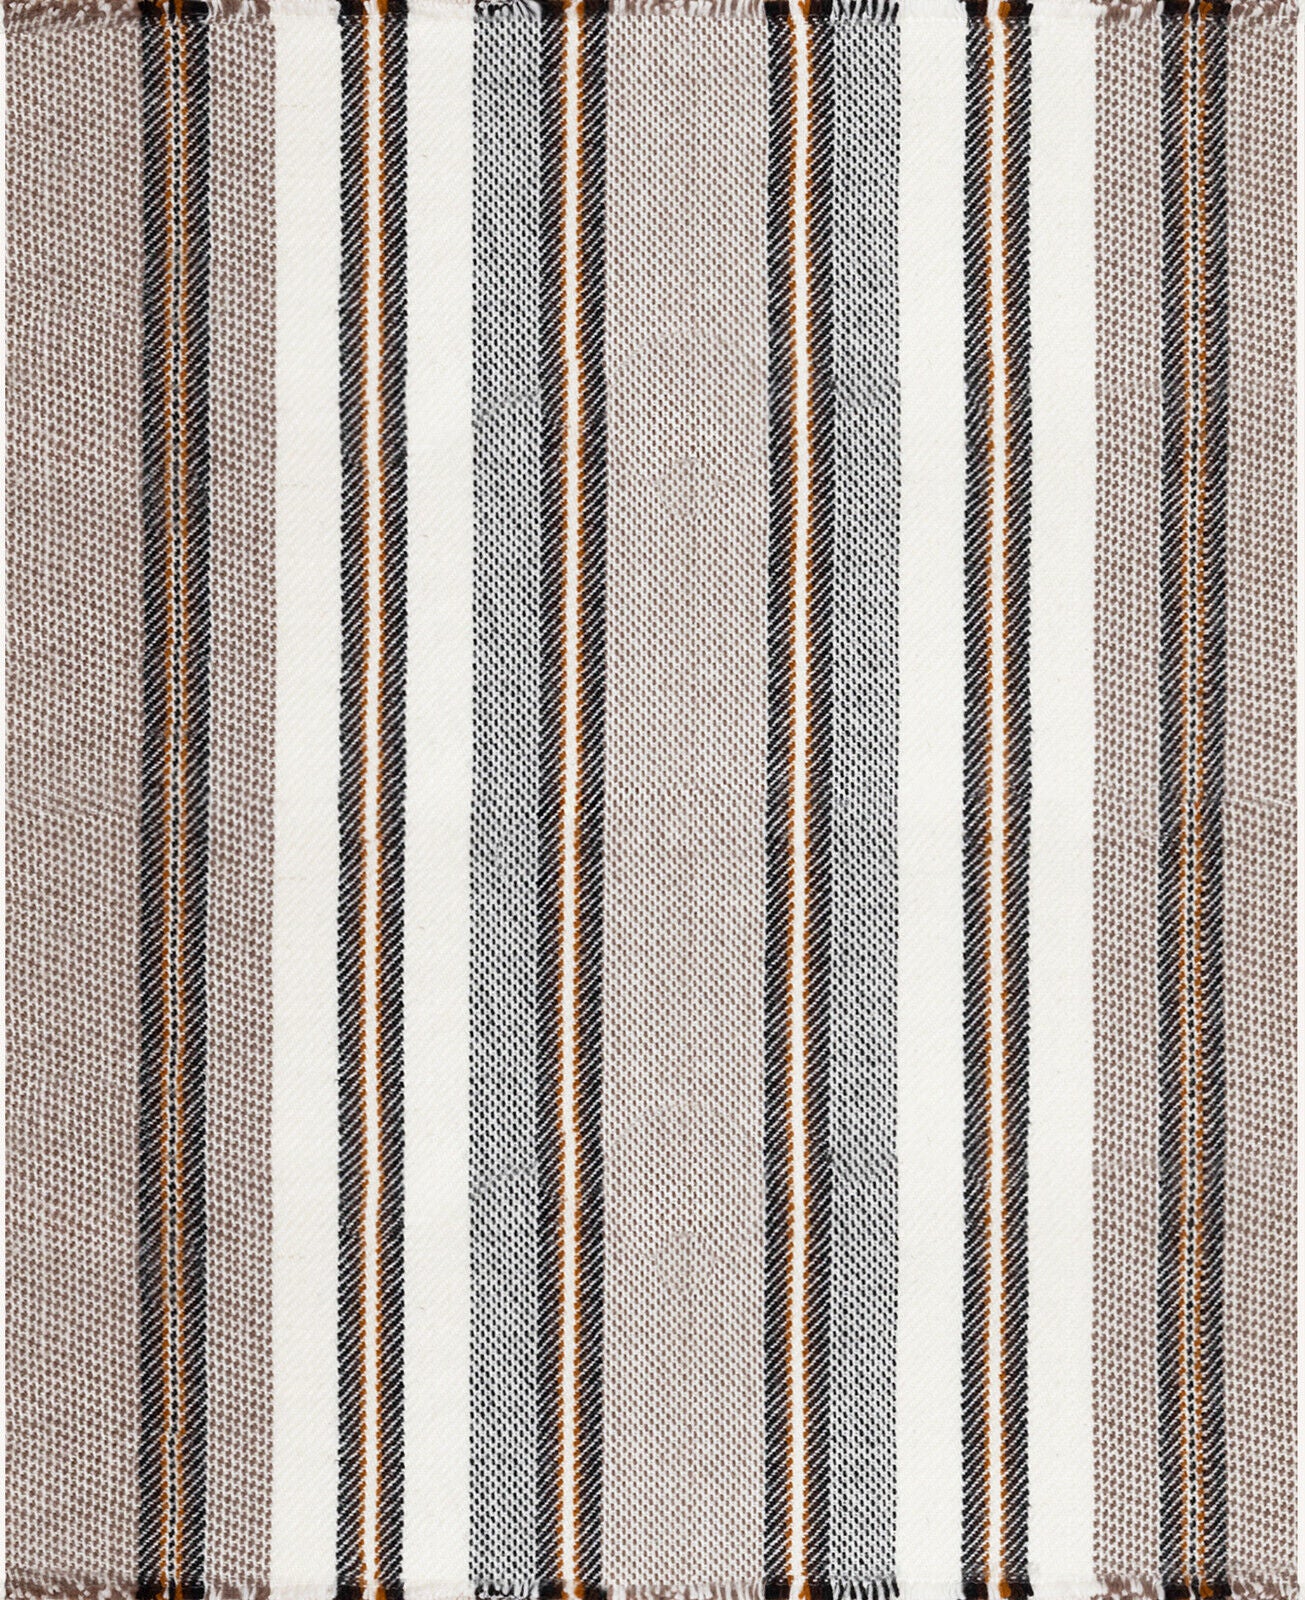 Cahauina - Heavy and Thick Llama wool throw Blanket - Striped beige